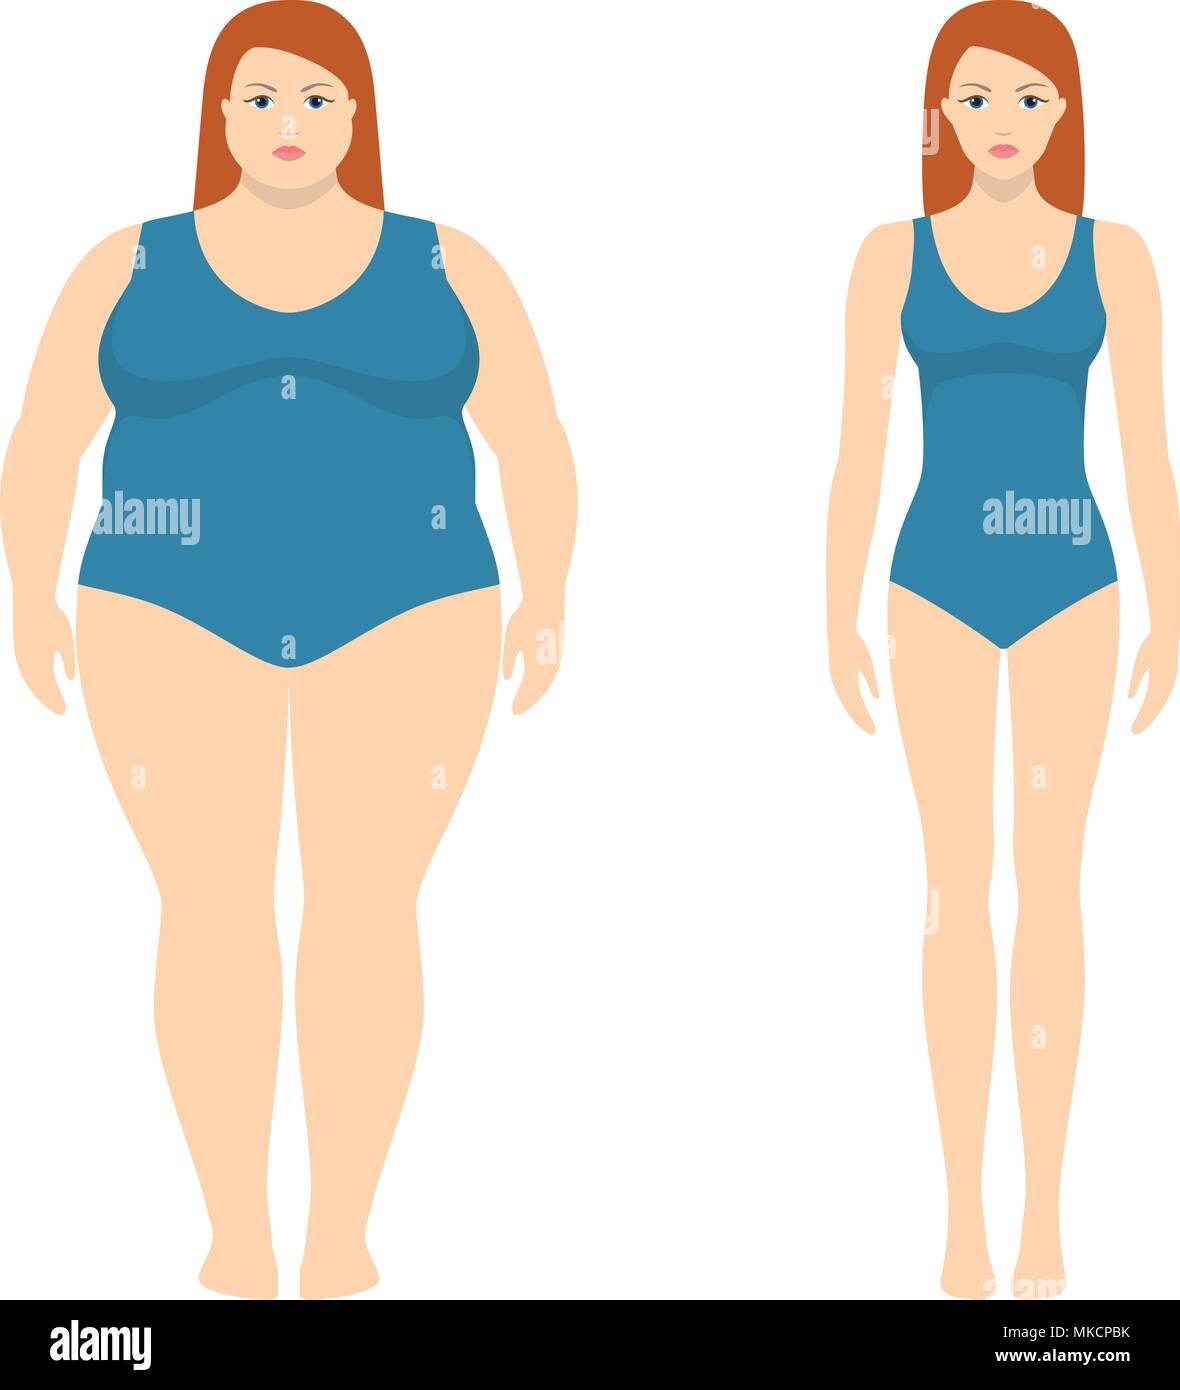 https://c8.alamy.com/comp/MKCPBK/vector-illustration-of-fat-and-slim-woman-in-flat-style-weight-loss-concept-before-and-after-obese-and-normal-female-body-MKCPBK.jpg